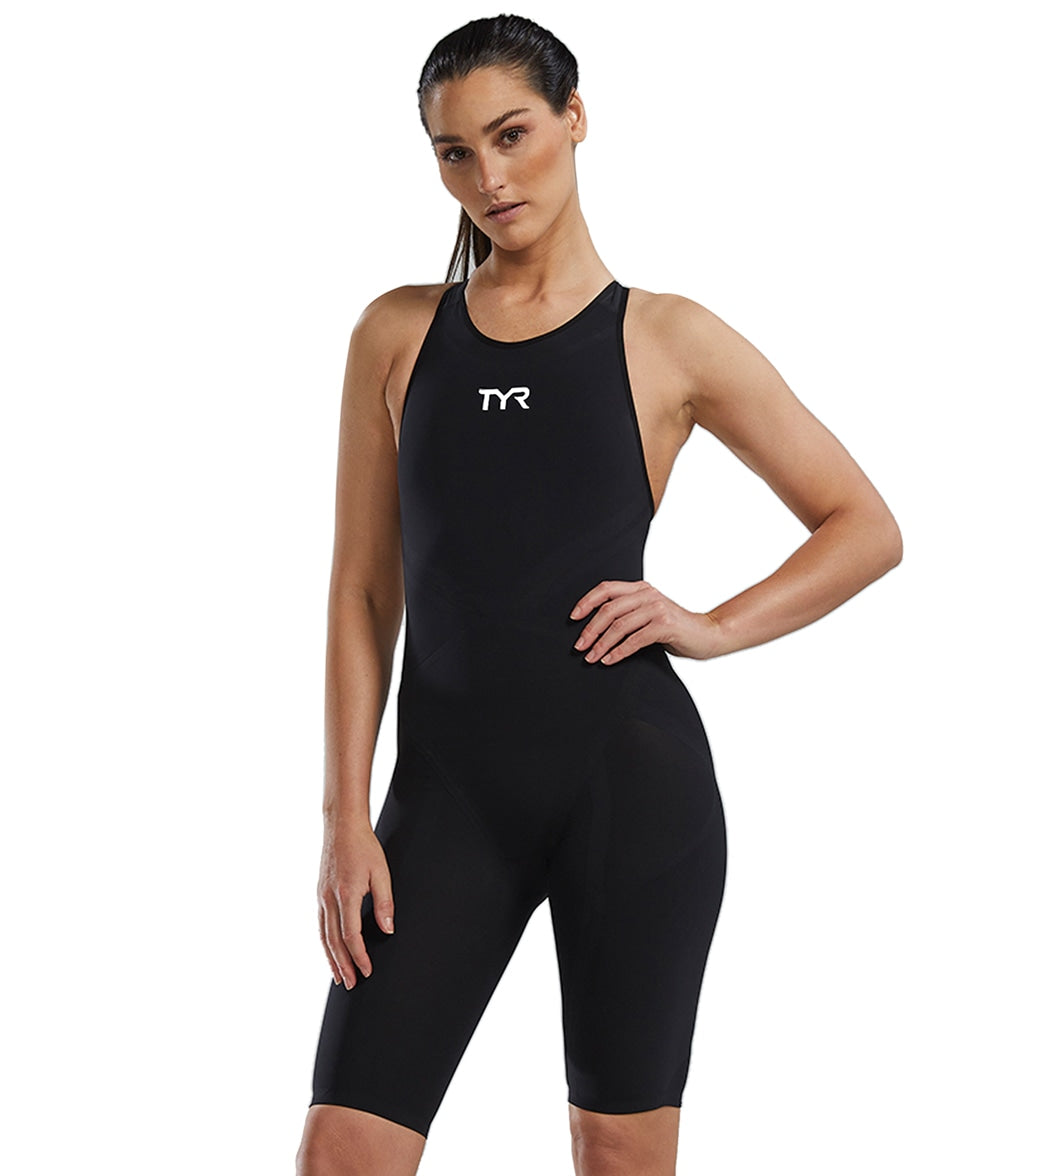 TYR Women's Venzo Camo Closed Back Tech Suit Swimsuit at